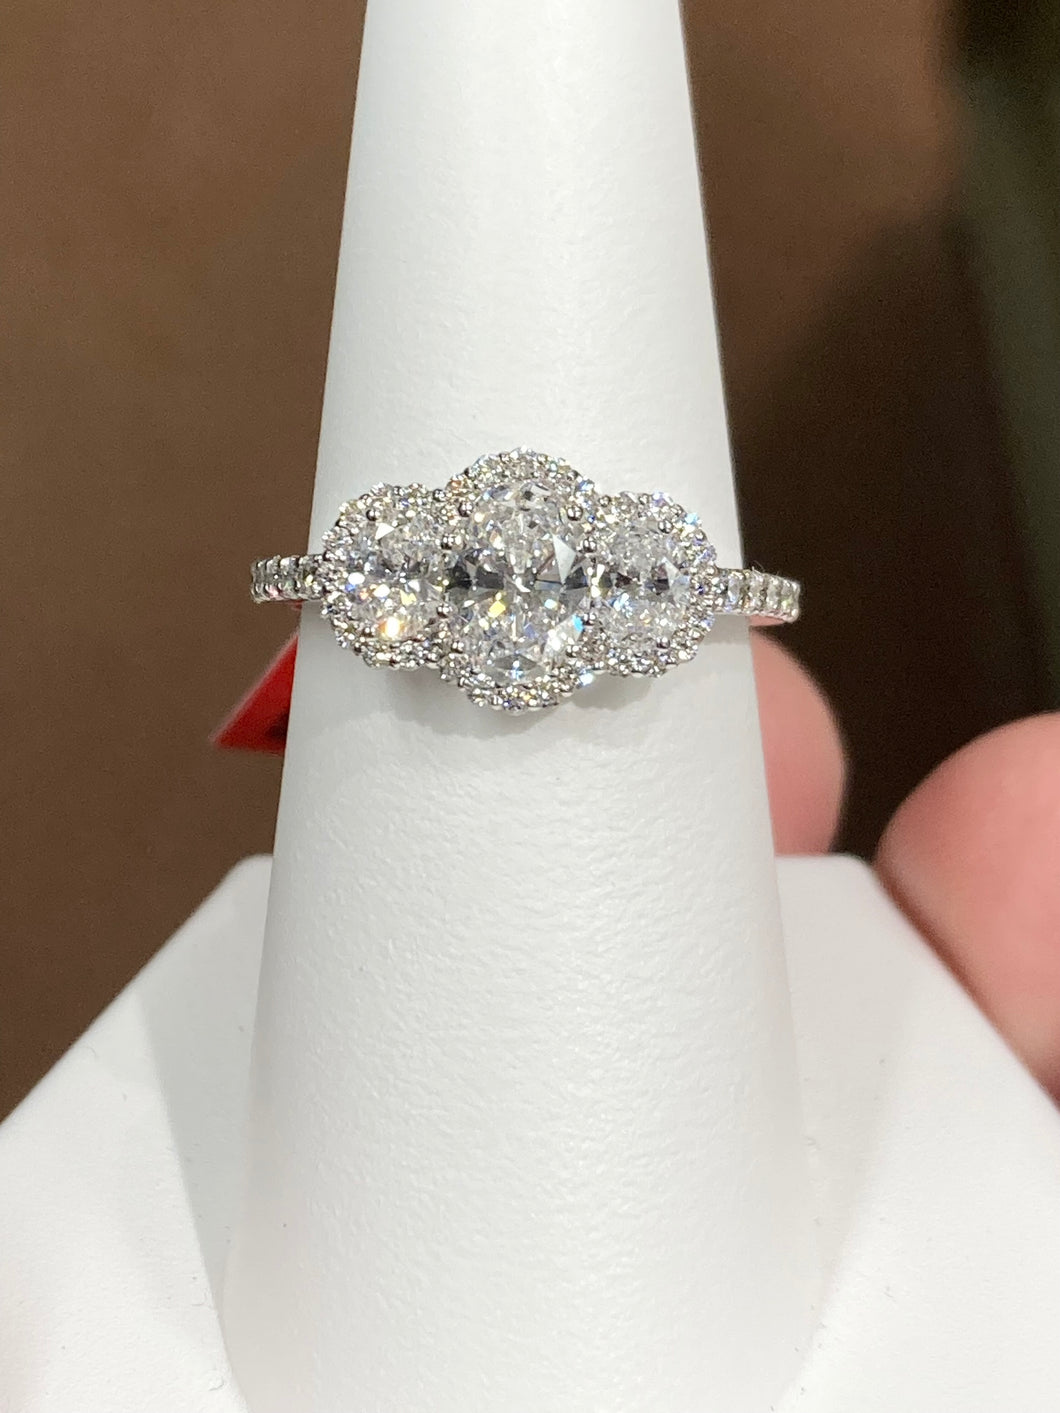 Oval Lab Created  Diamond White Gold Engagement Ring